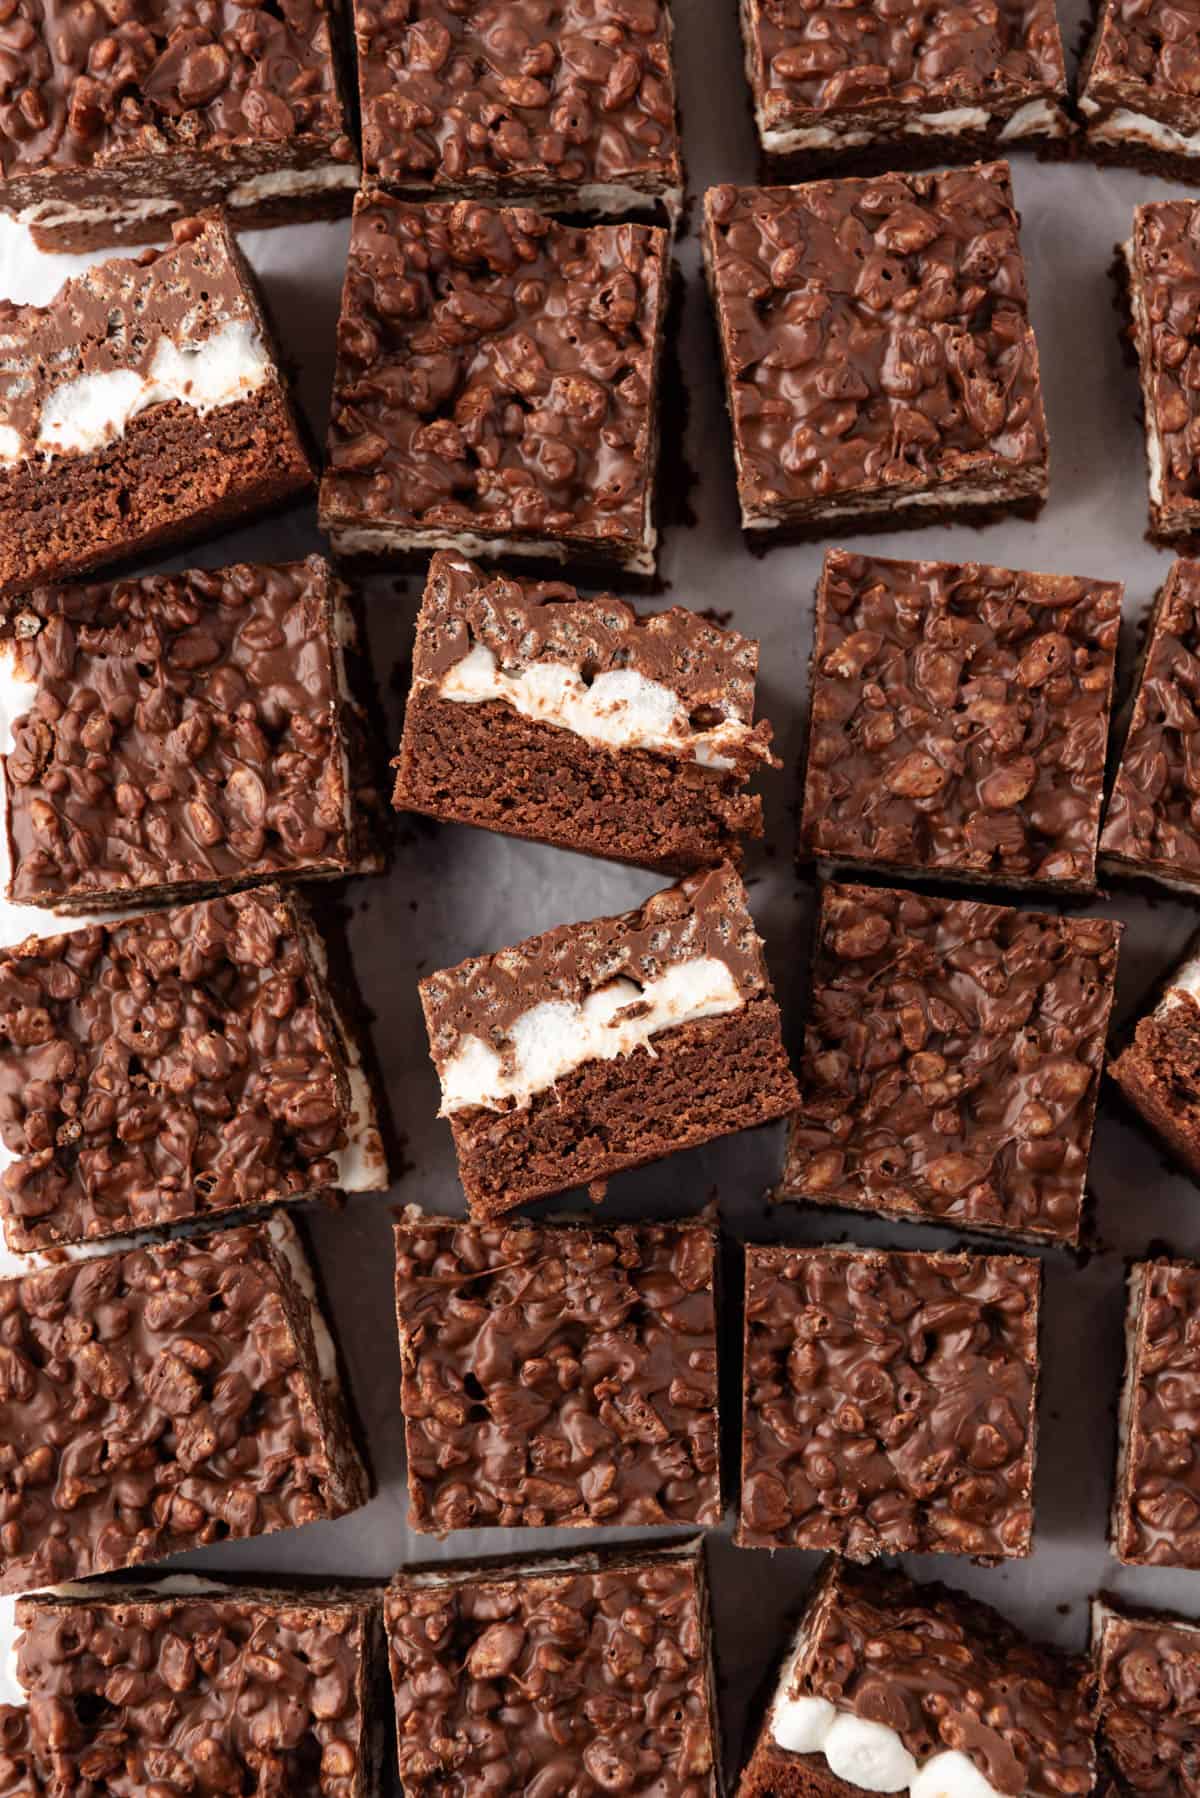 An overhead image of chocolate brownies with marshmallows and a chocolate peanut butter rice krispie topping cut into squares with some on their sides.